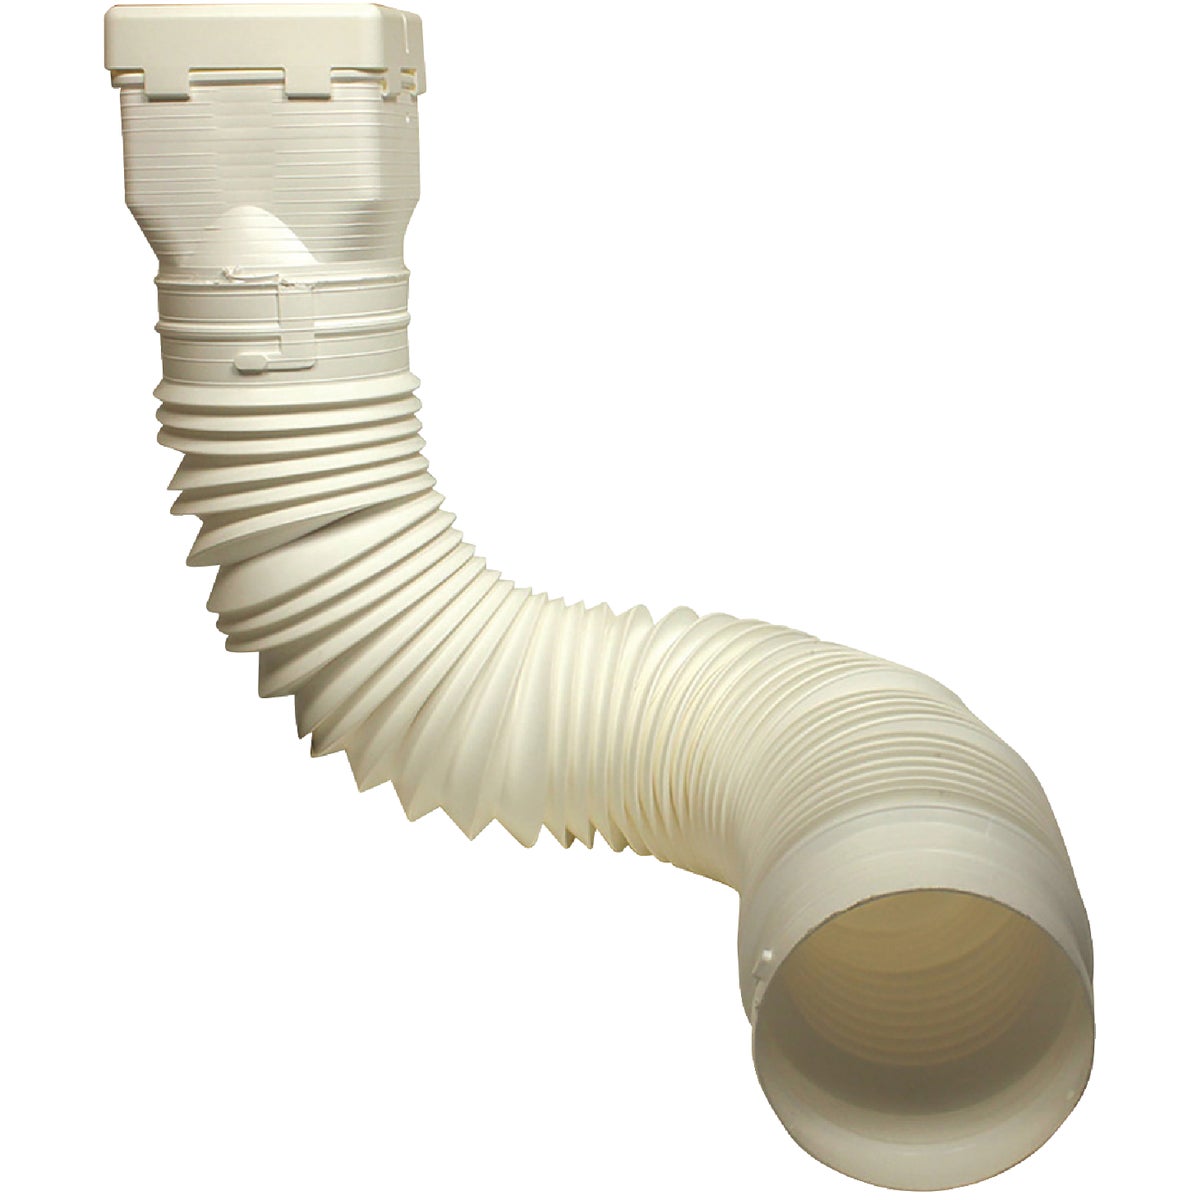 Item 119342, Flexible downspout extension is easy to install.